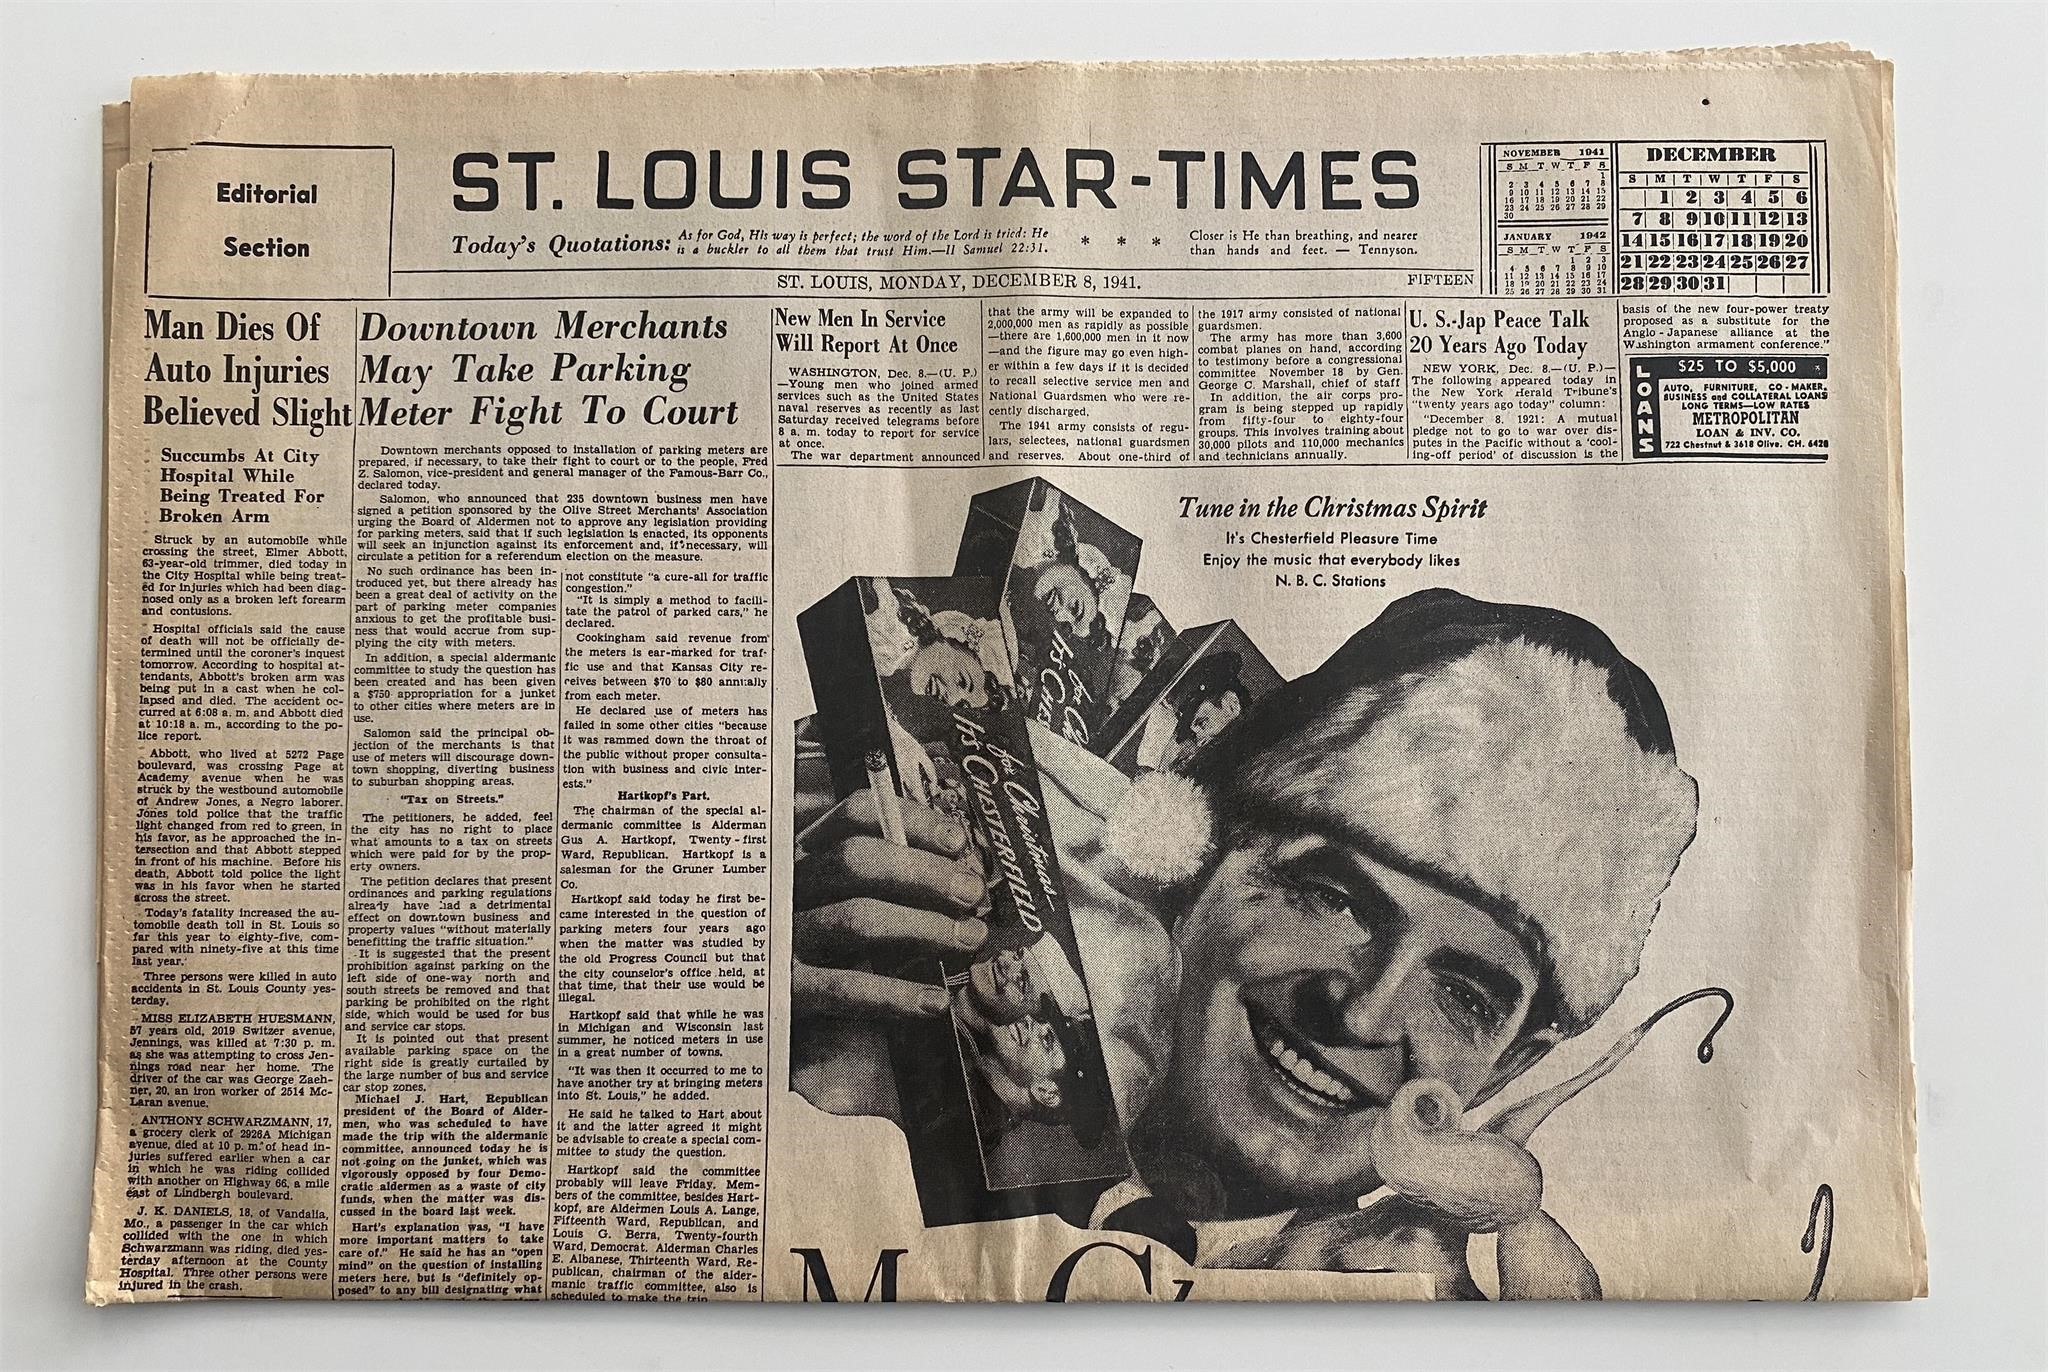 St. Louis Star-Times announcing Men will Report to